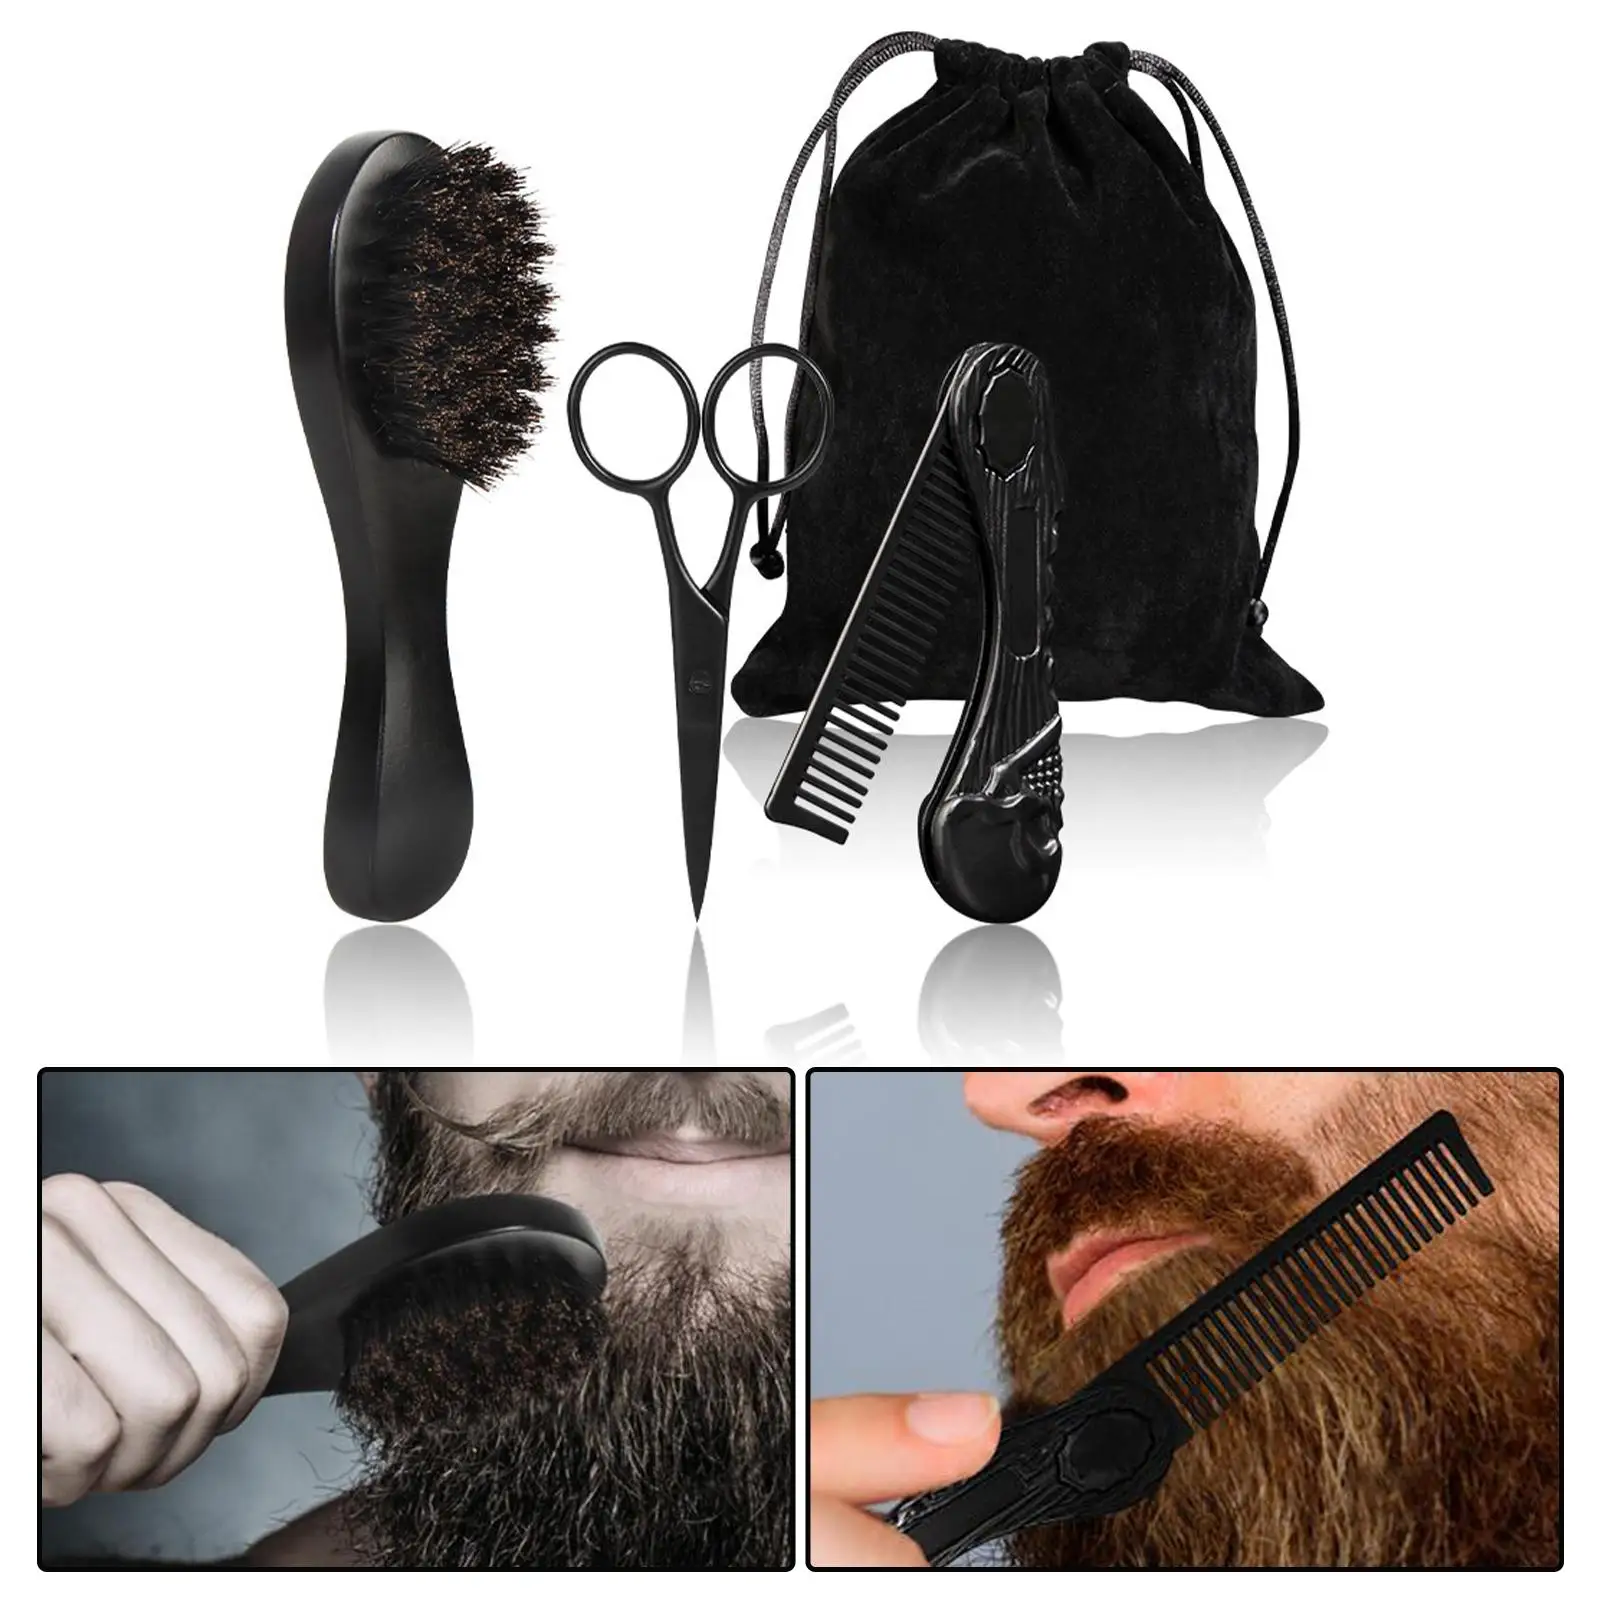 3Pcs Professional Beard Care Kit for Men Wooden Gift Comb with Dustproof Bag Brush for Men`s Travel Home Cleaning Grooming Tool